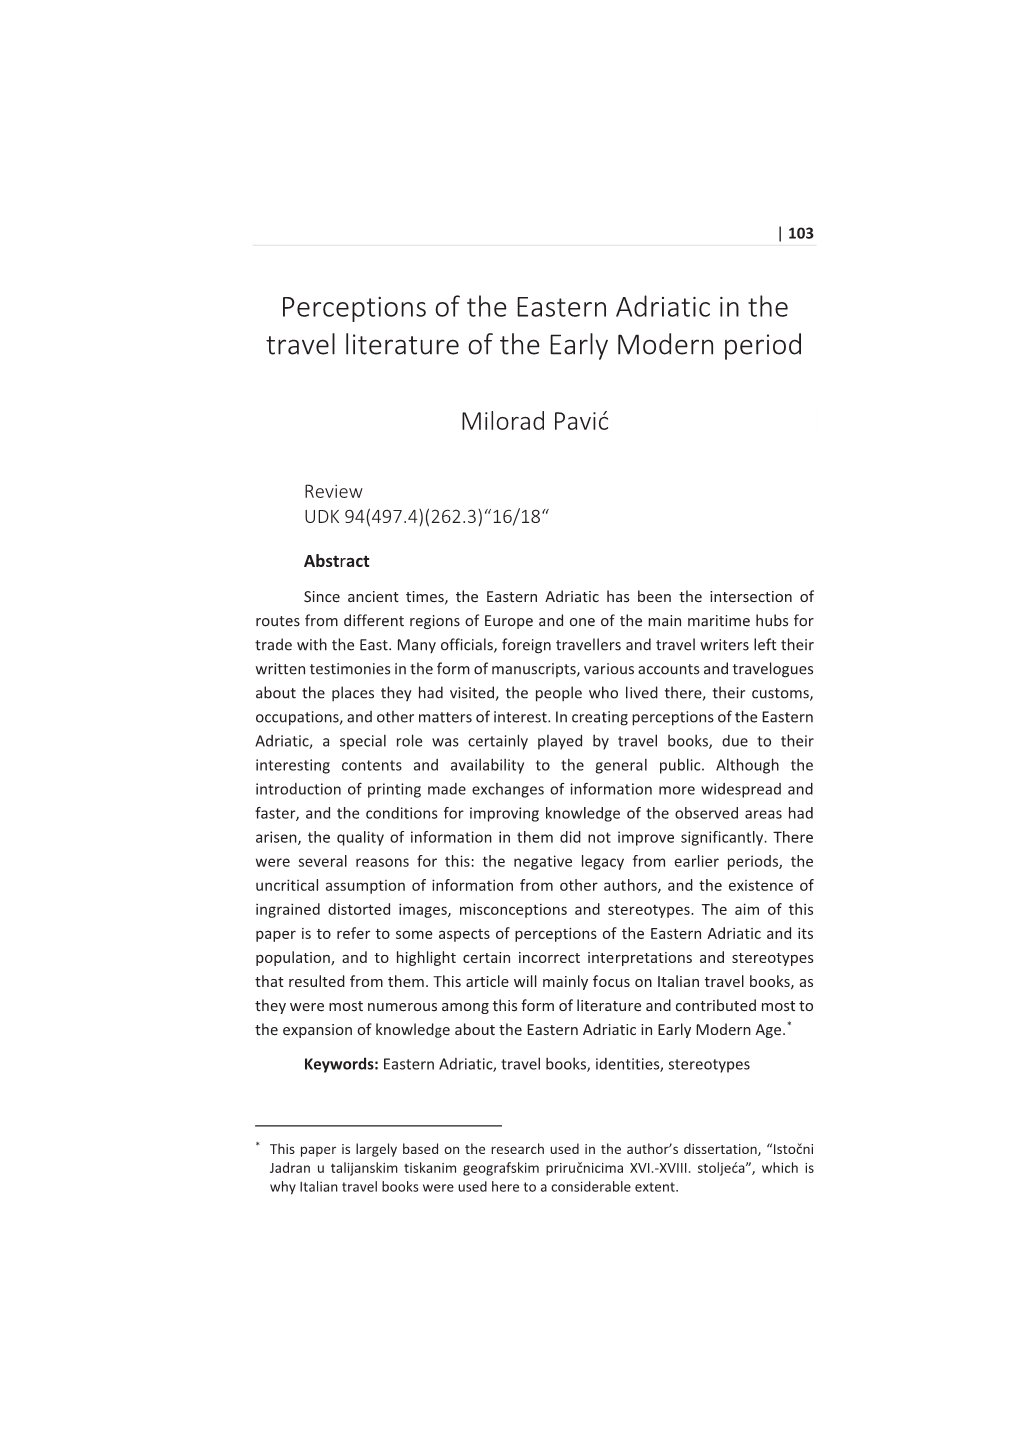 Perceptions of the Eastern Adriatic in the Travel Literature of the Early Modern Period